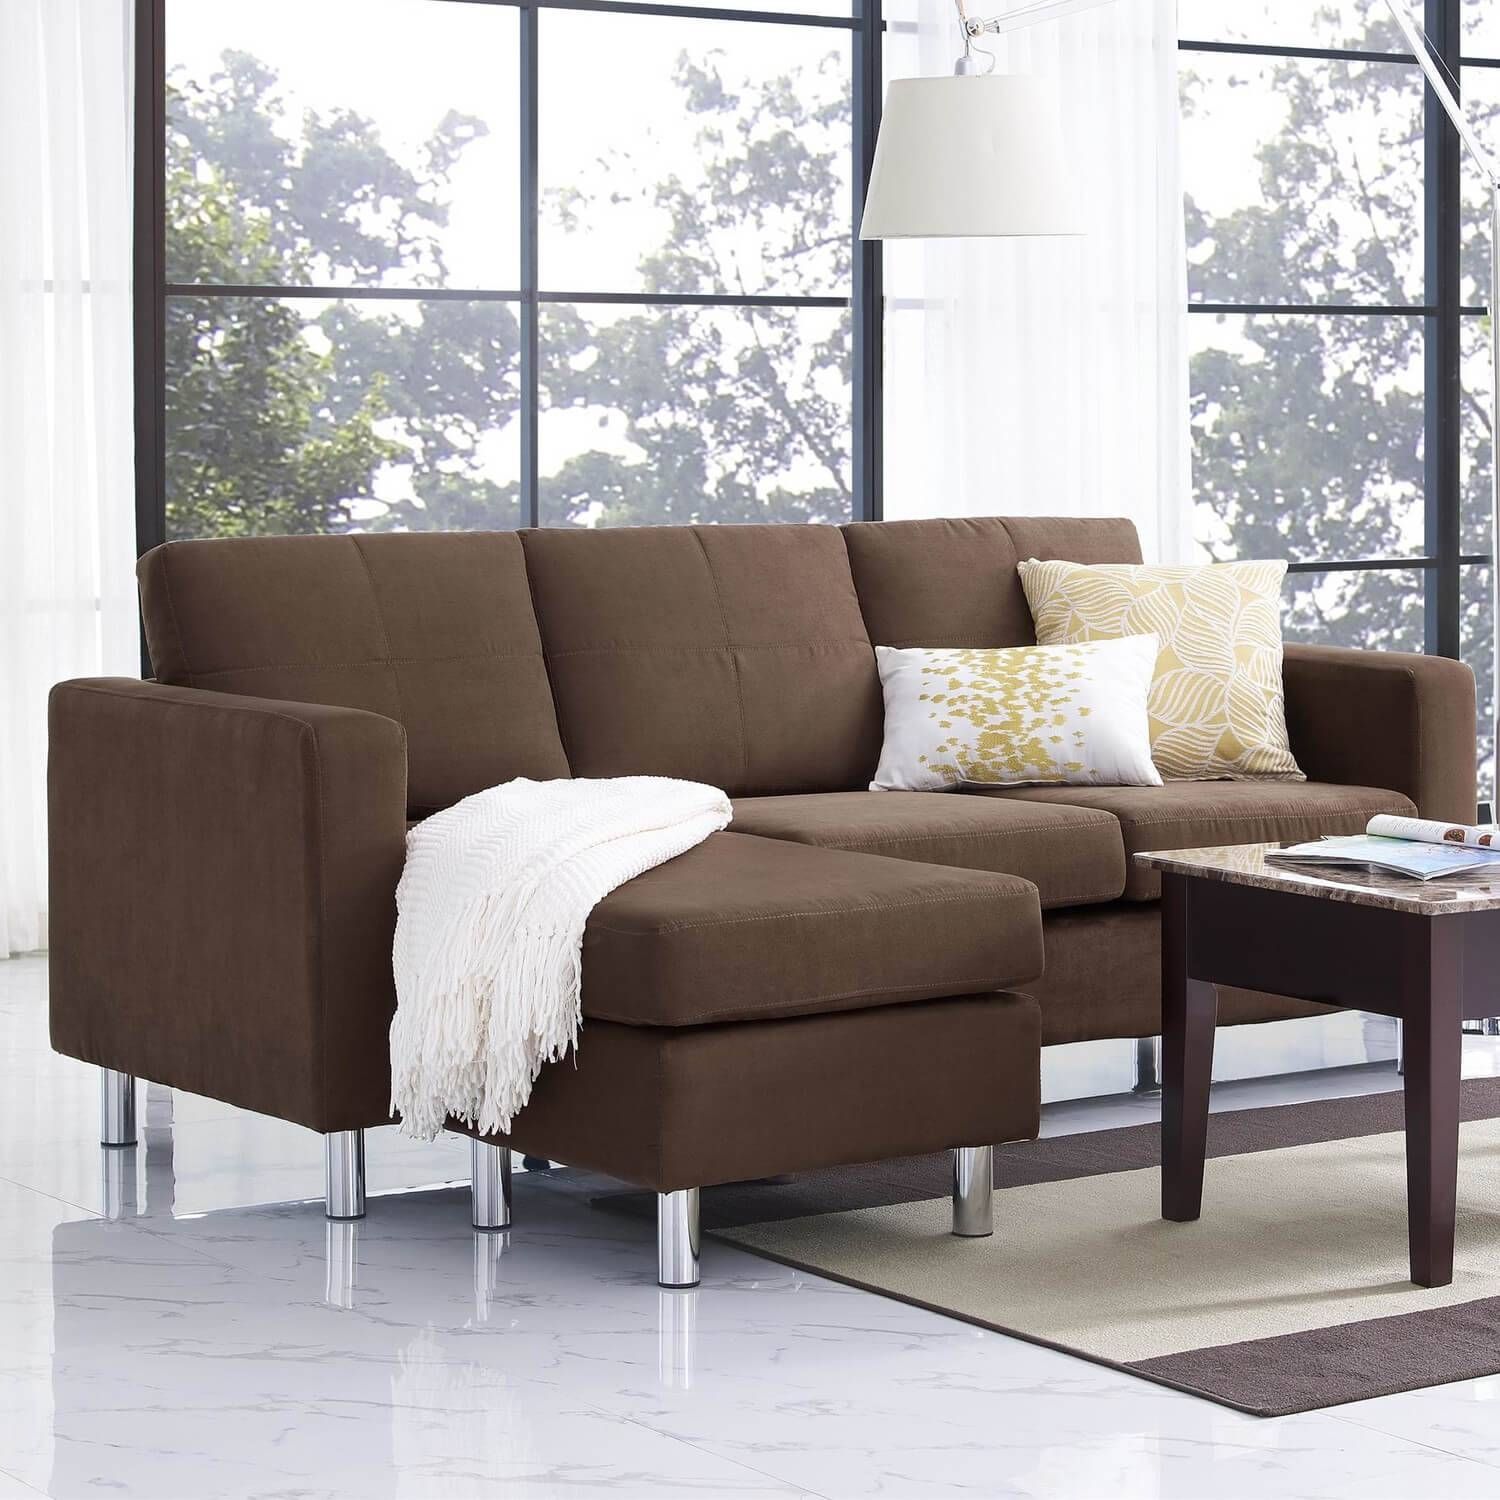 Furniture & Sofa: Perfect Small Spaces Configurable Sectional Sofa With Regard To Sectional Sofas In Small Spaces (View 10 of 25)